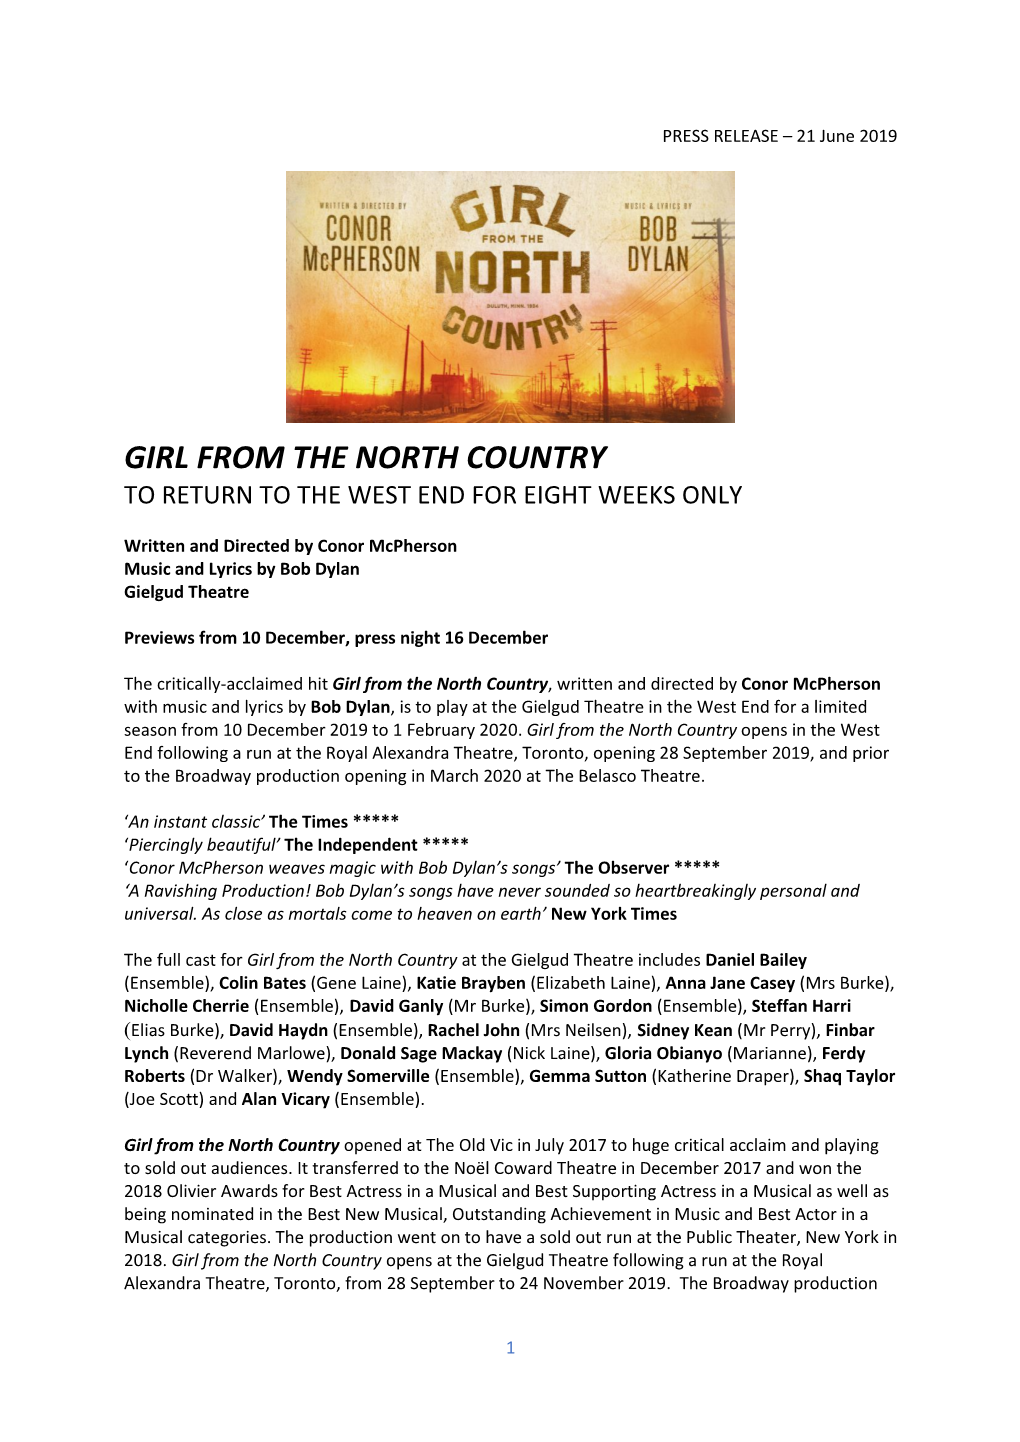 Girl from the North Country to Return to the West End for Eight Weeks Only